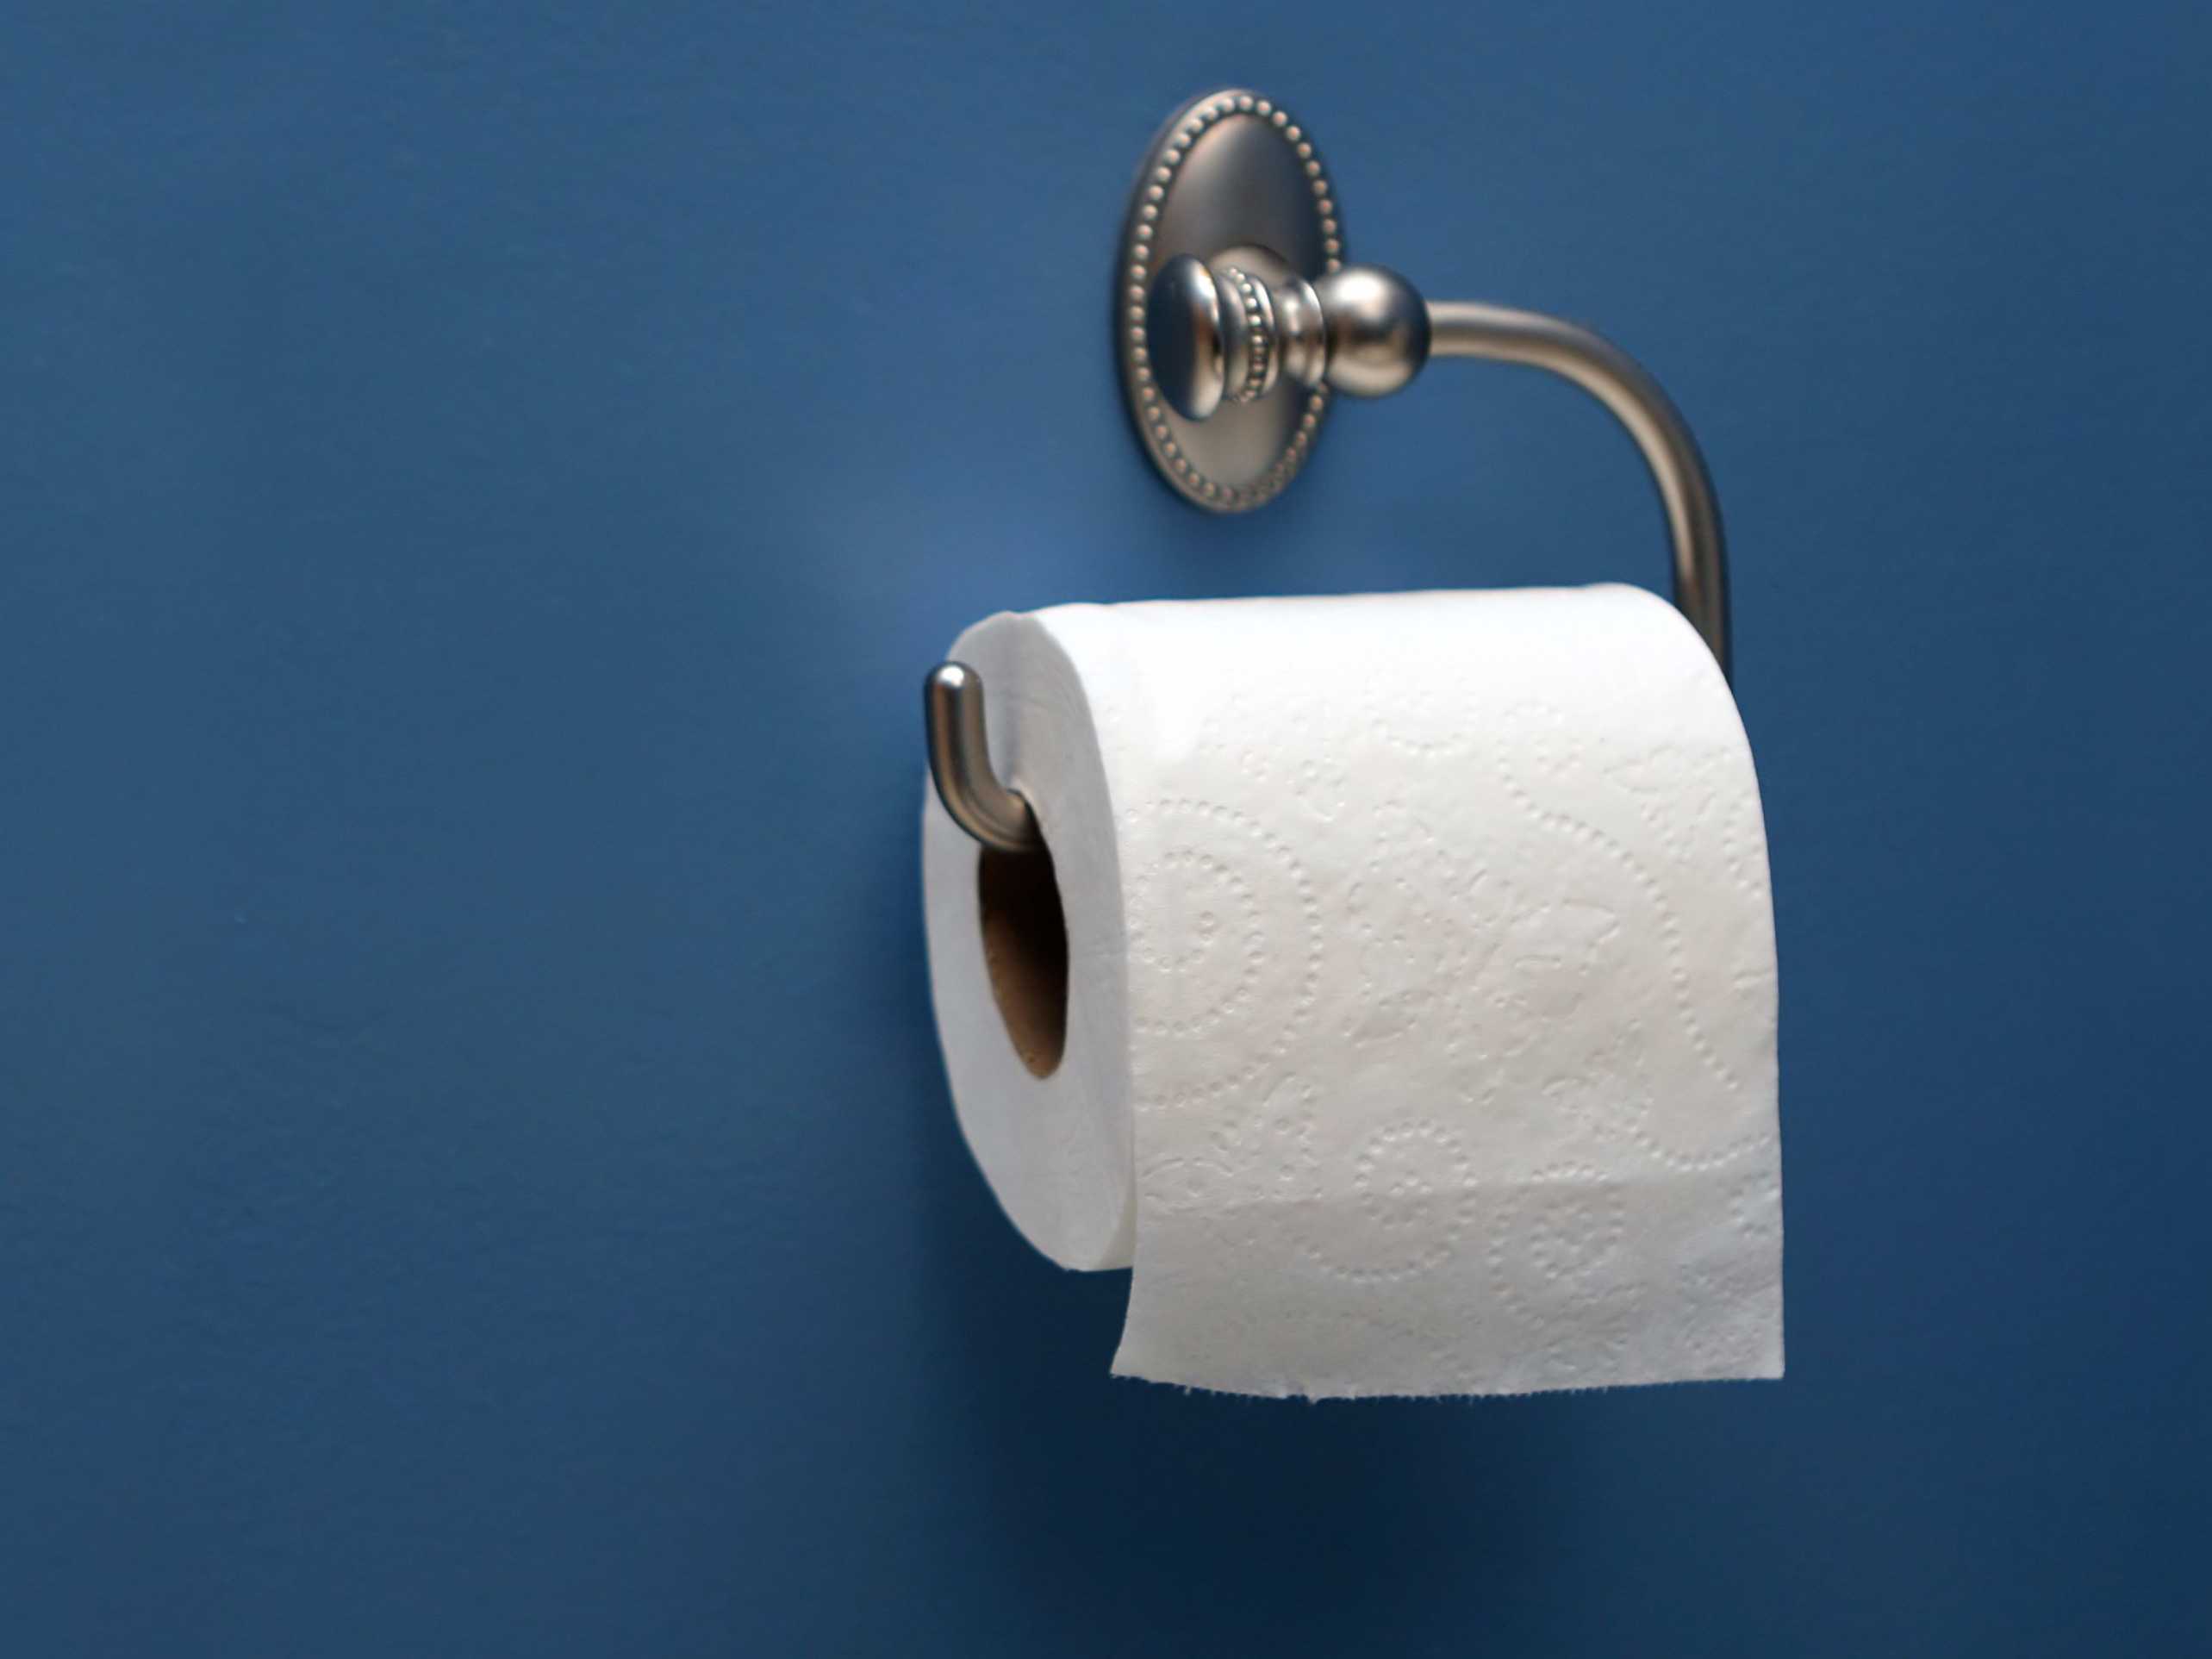 124-year-old patent solves the 'over versus under' toilet paper roll ...